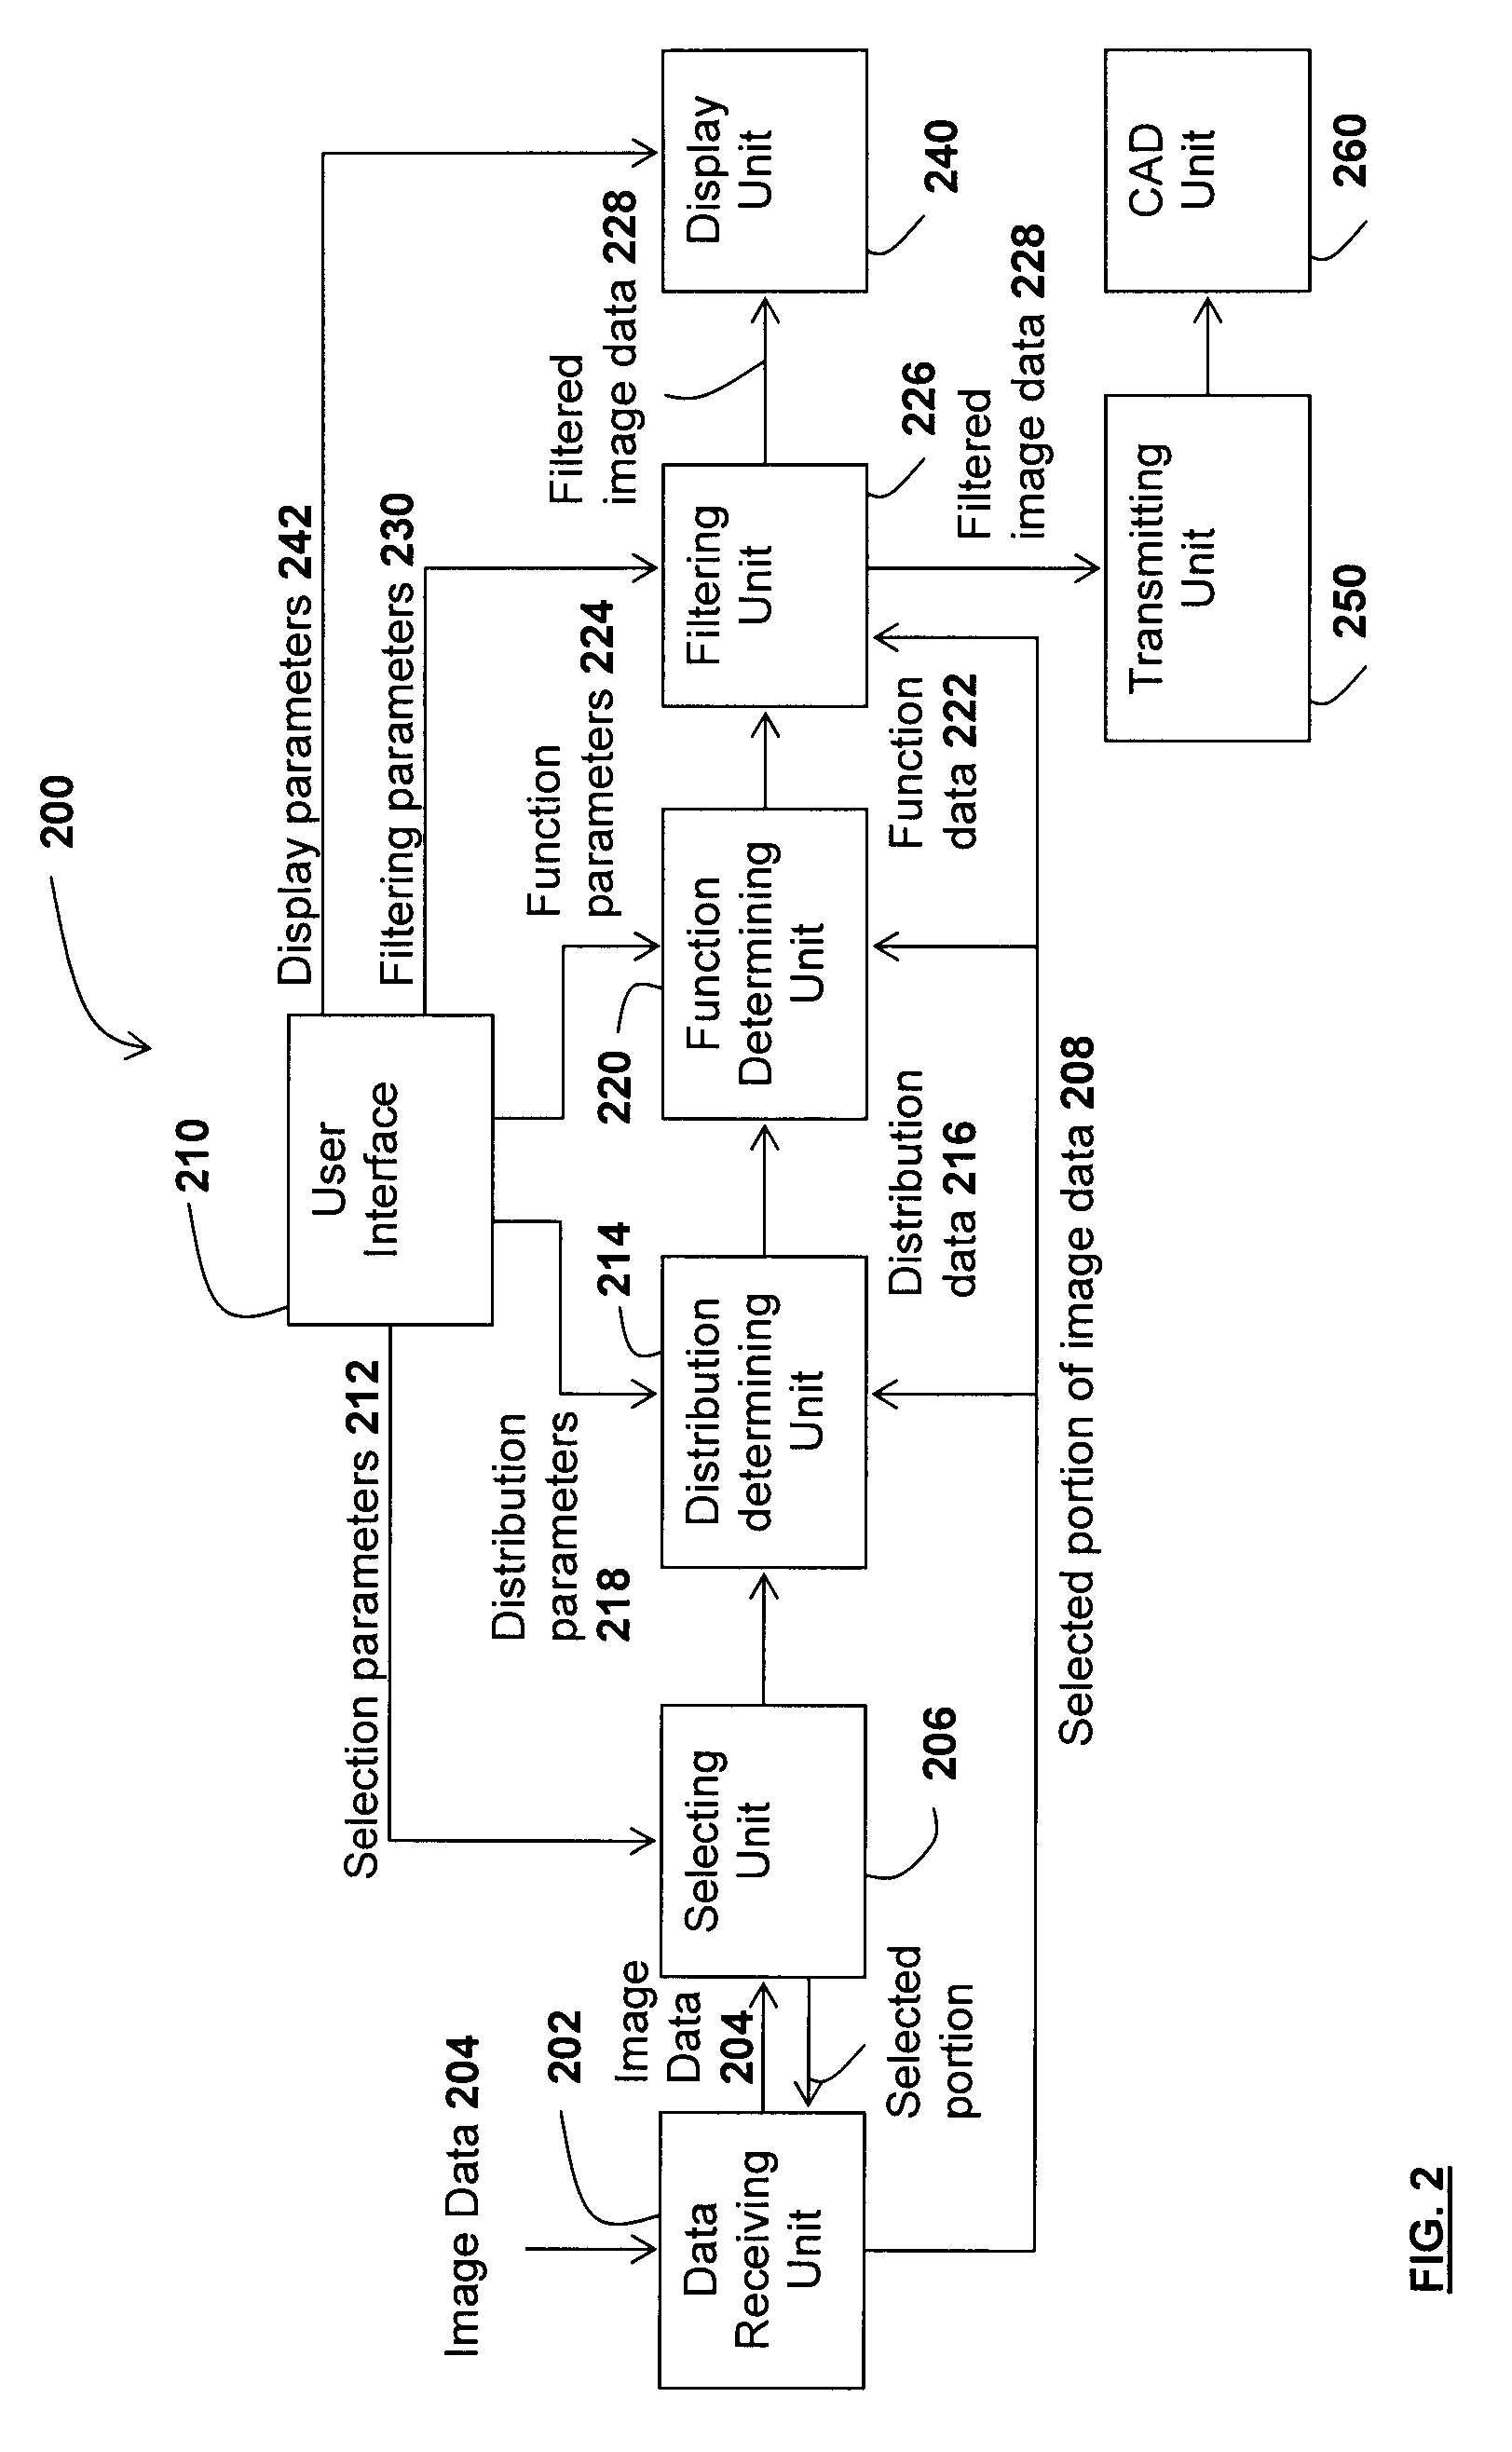 Method and system for filtering image data and use thereof in virtual endoscopy